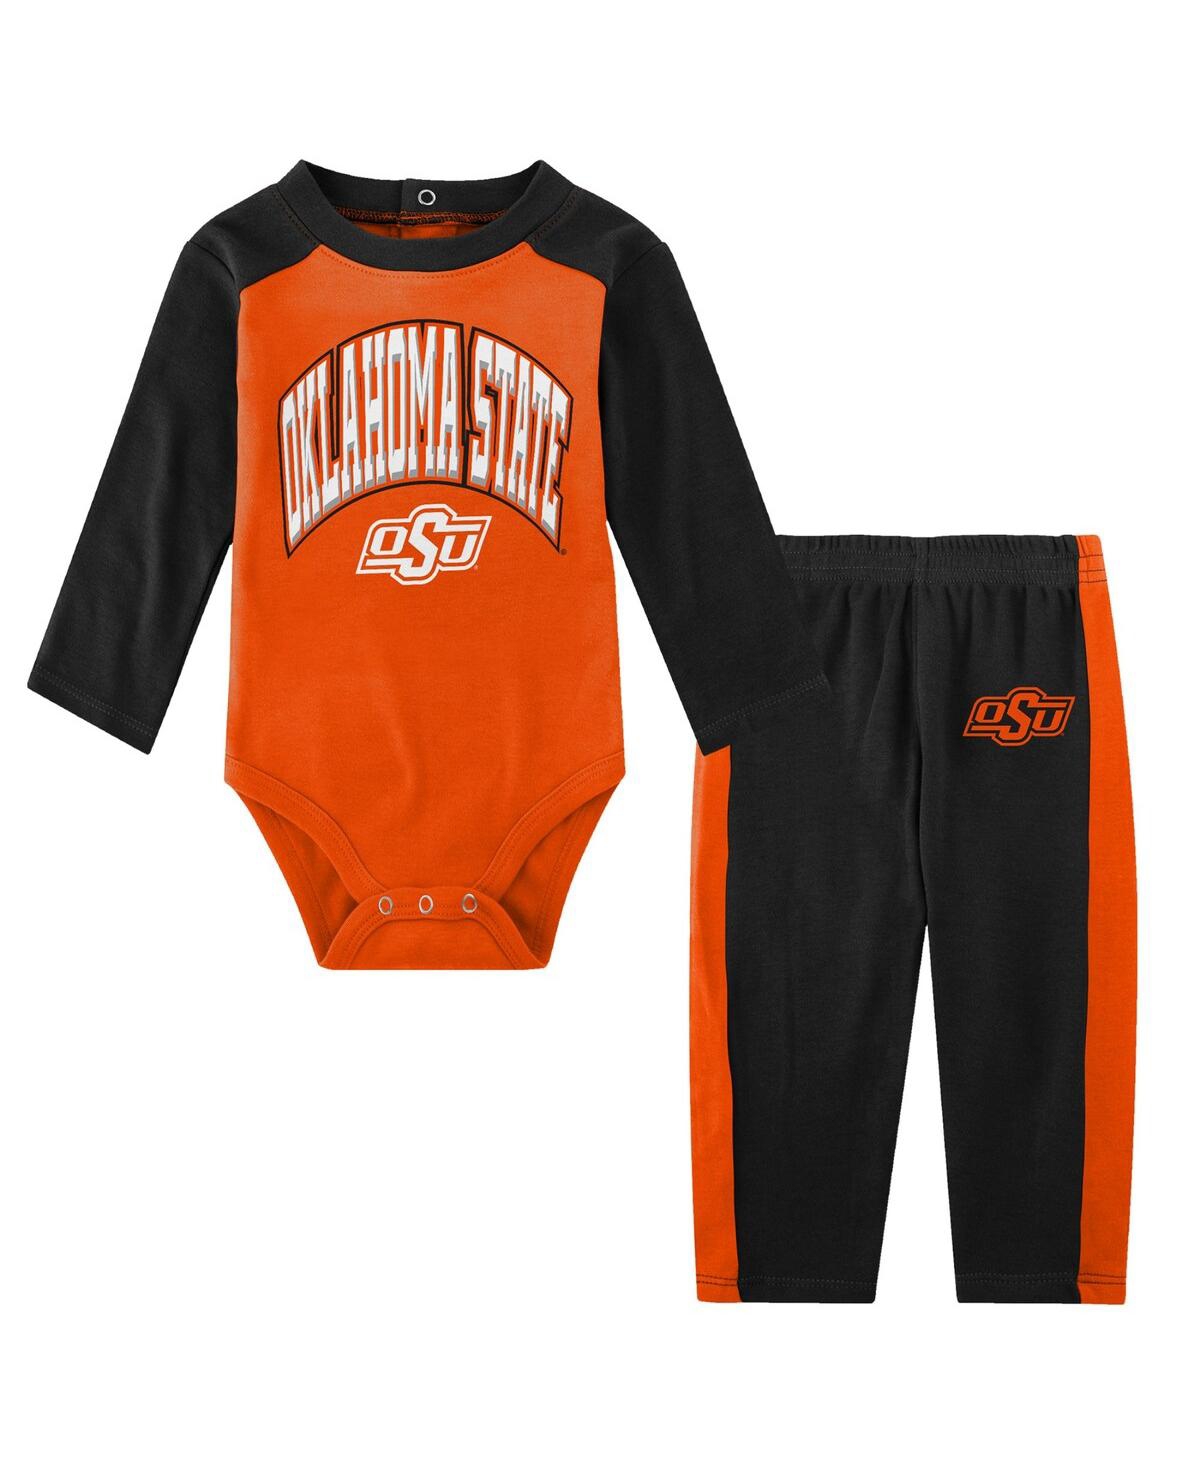 Outerstuff Babies' Infant Boys And Girls Orange Oklahoma State Cowboys Rookie Of The Year Long Sleeve Bodysuit And Pant